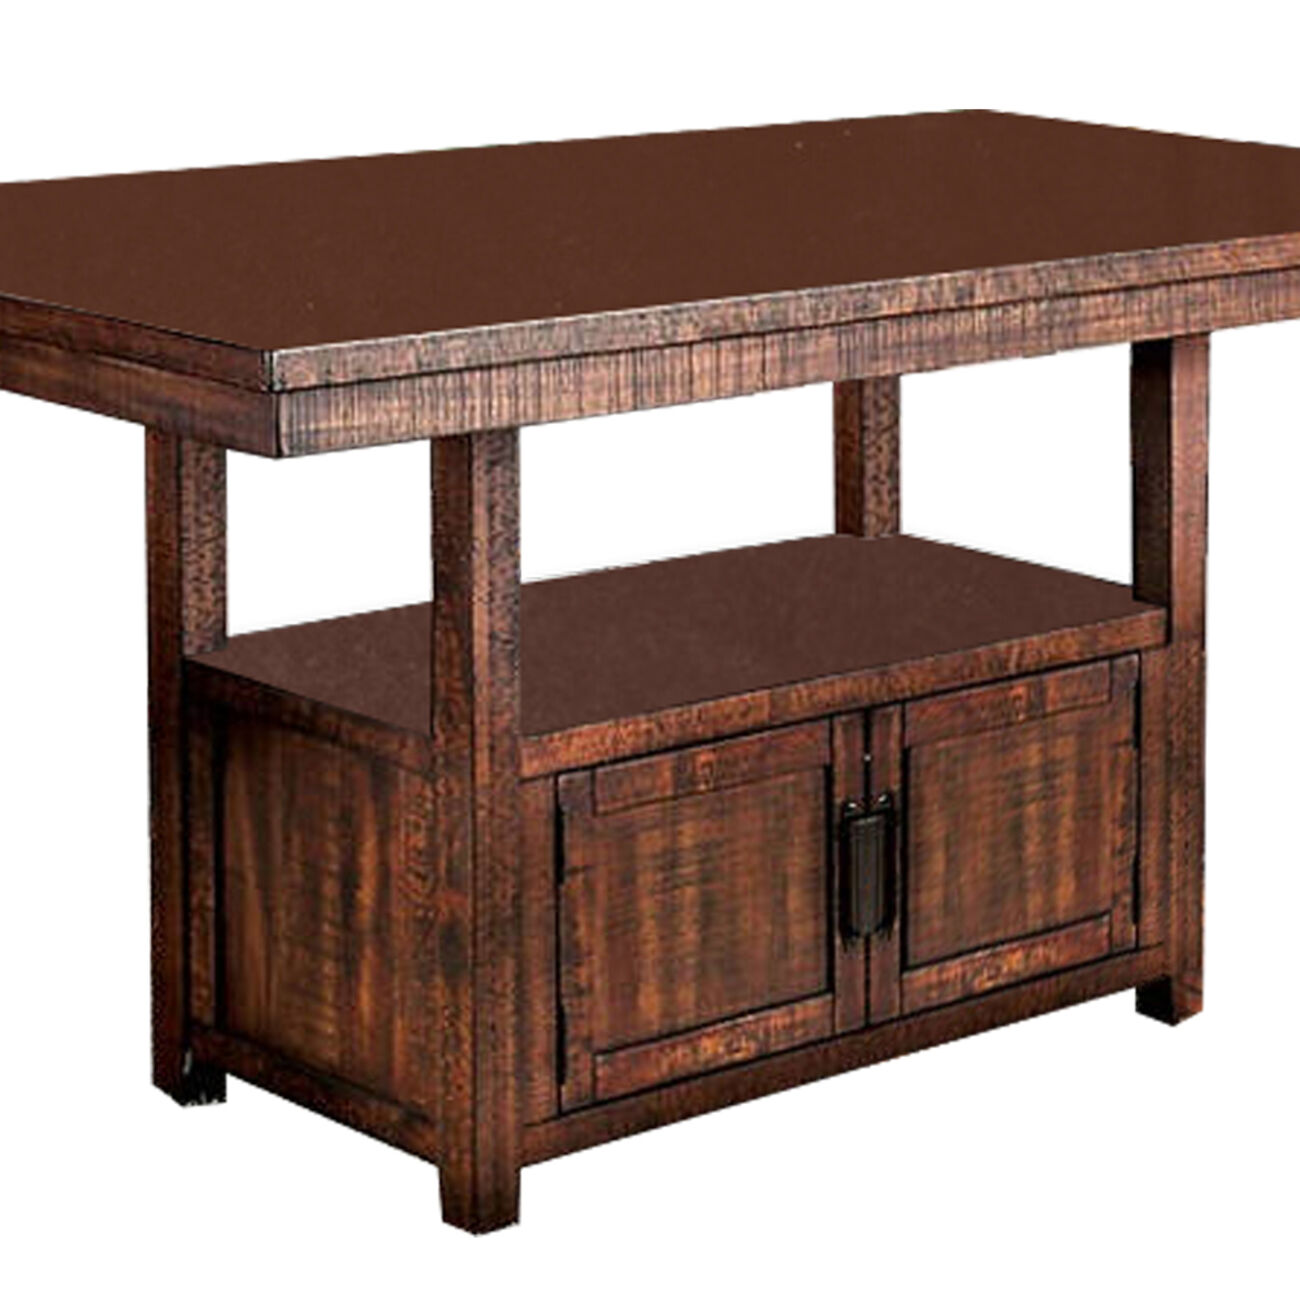 Wooden Dining Table with Additional Storage Space, Brown